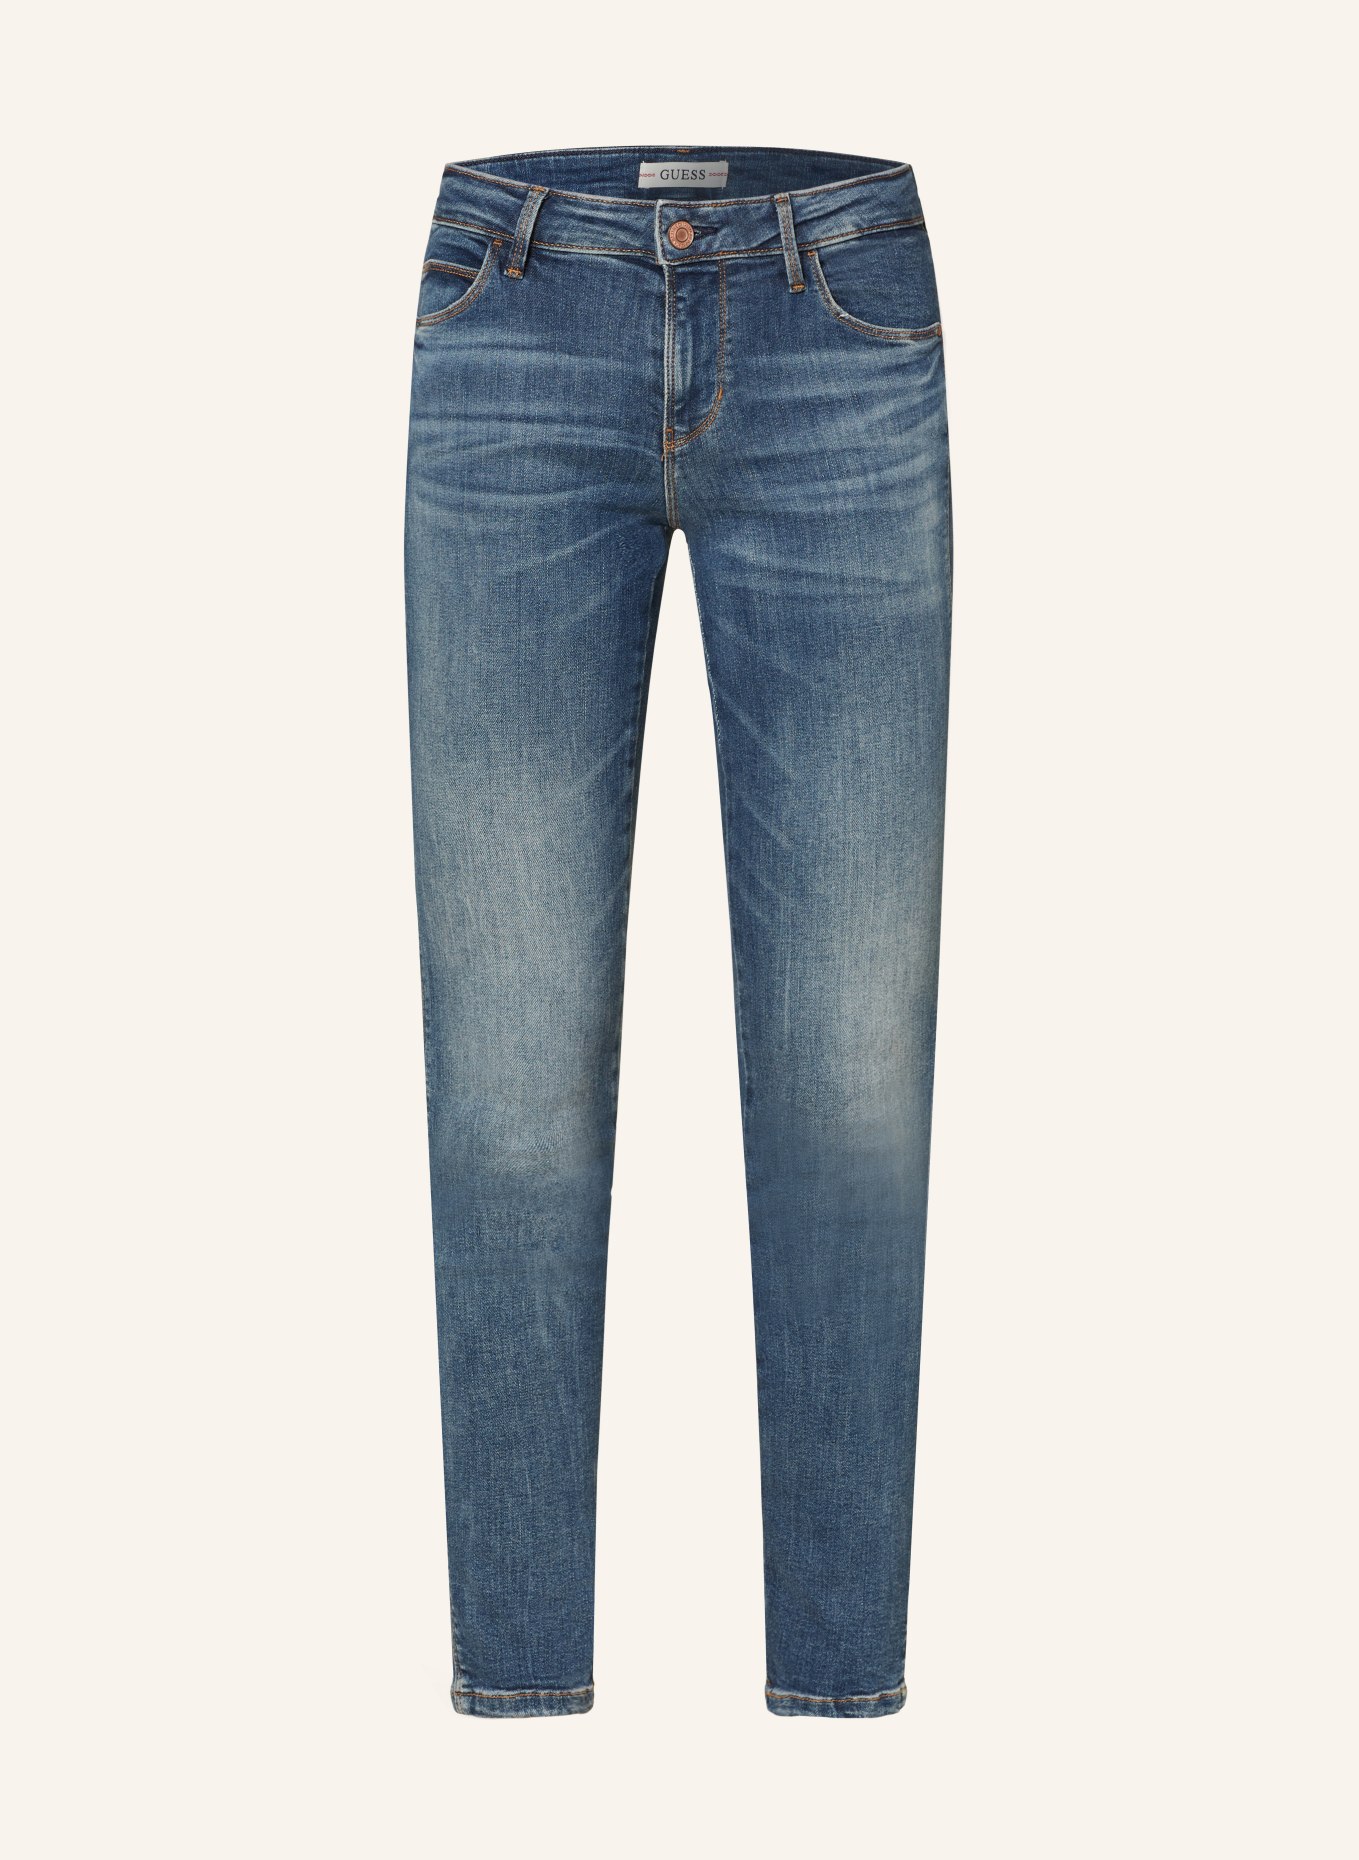 GUESS Skinny Jeans, Farbe: CMD1 CARRIE MID. (Bild 1)